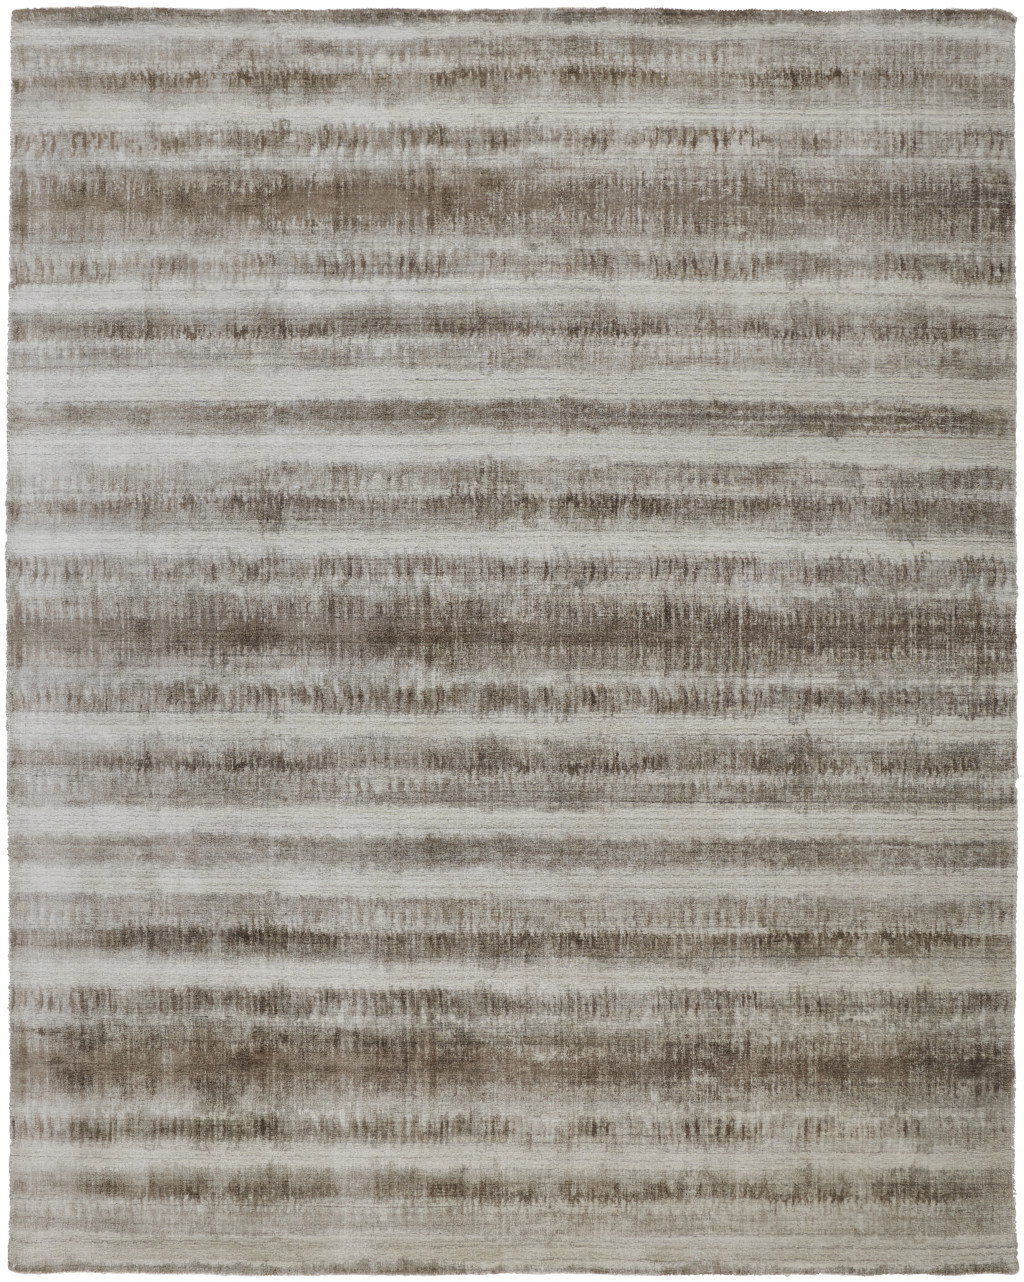 12' X 15' Tan Ivory And Brown Abstract Hand Woven Area Rug-514440-1